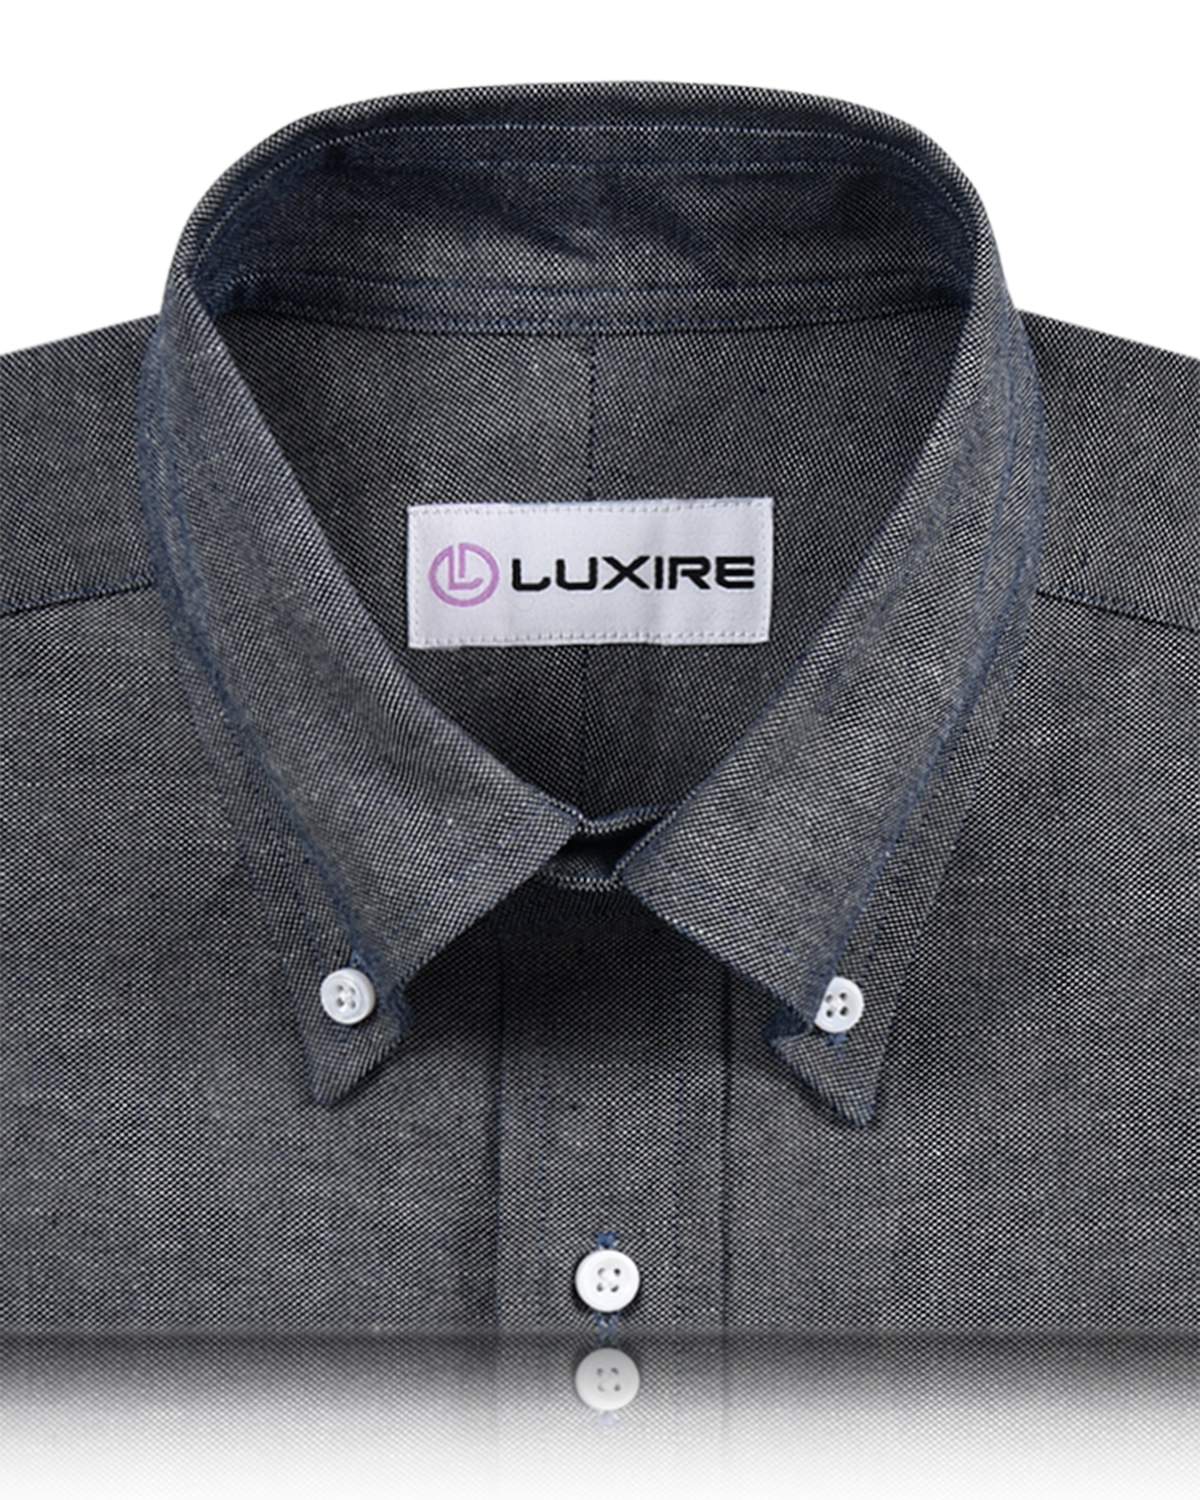 Collar of the custom oxford shirt for men by Luxire in dark navy blue